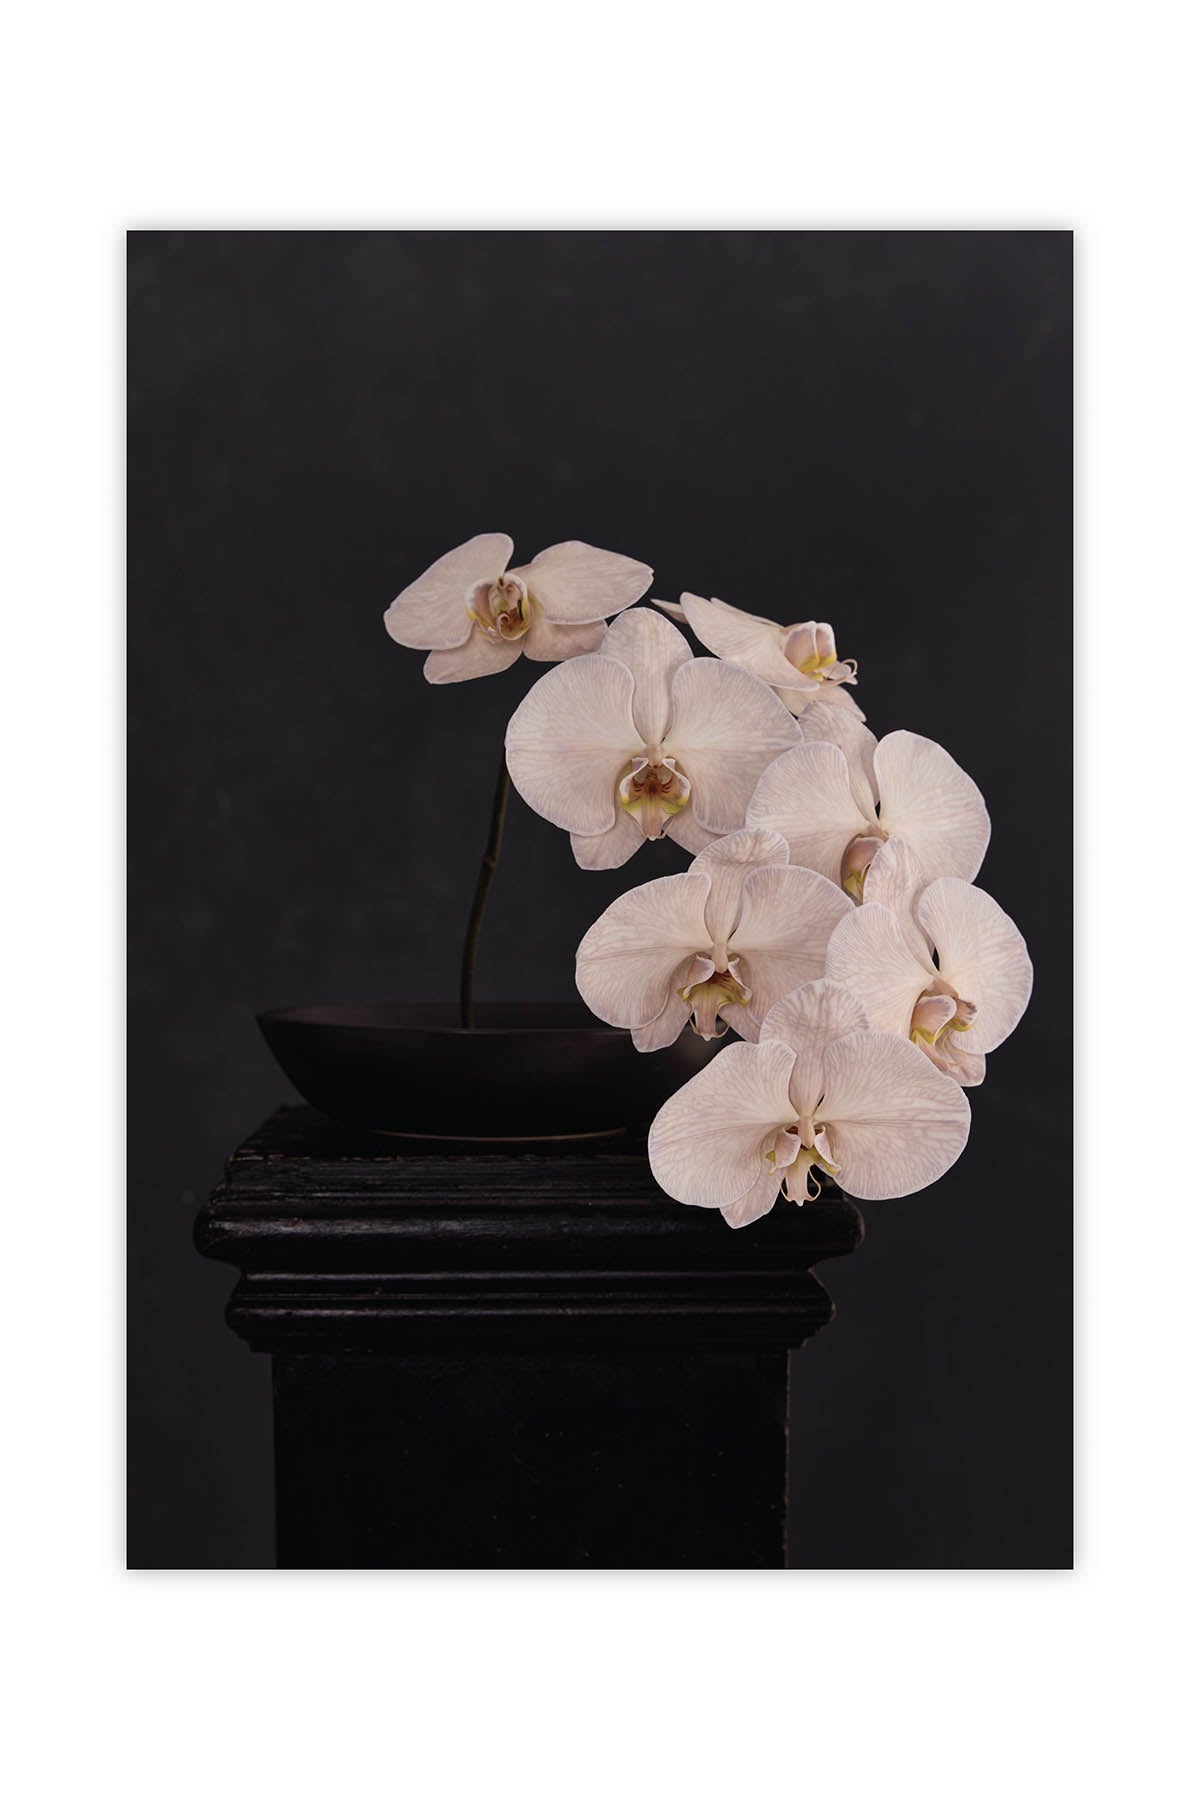 Fine Art Print Of A White Phaleanopsis Stem In A Black Bowl On A Black Mantle With A Black Rustic Background